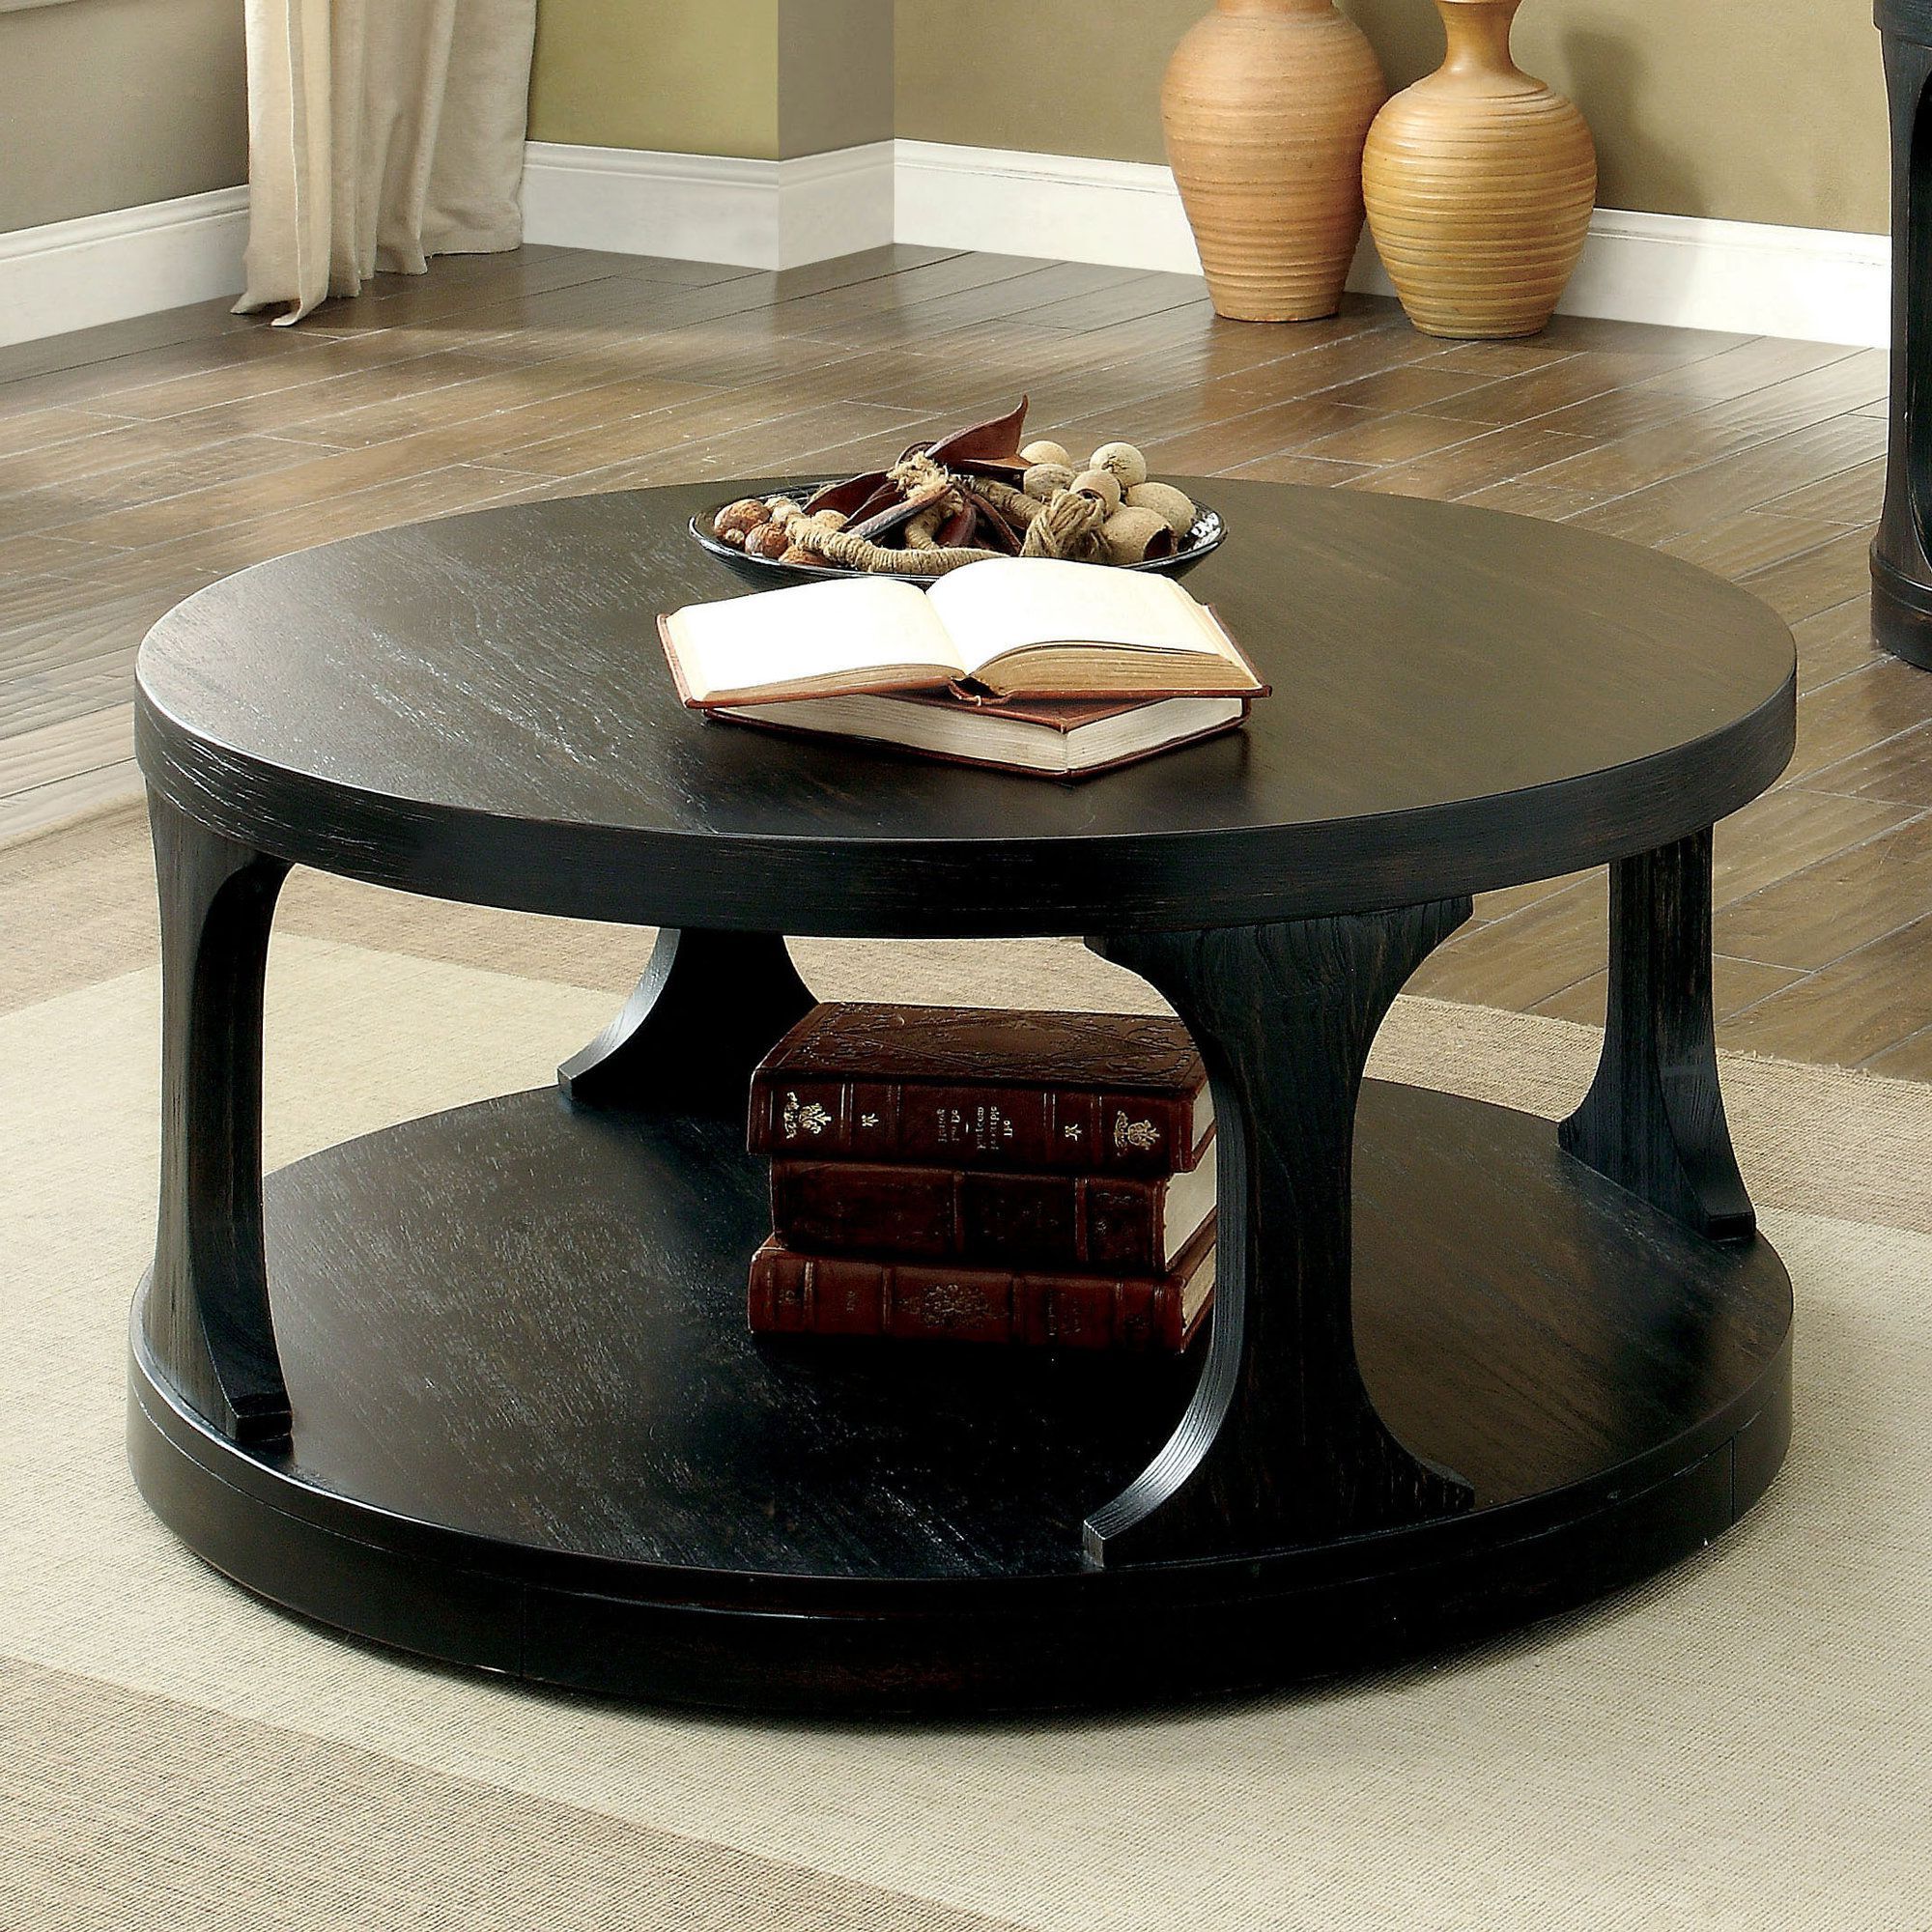 Bring A Touch Of Elegance To Your Home With A Black Circle Coffee Table Pertaining To Well Liked Full Black Round Coffee Tables (View 9 of 15)